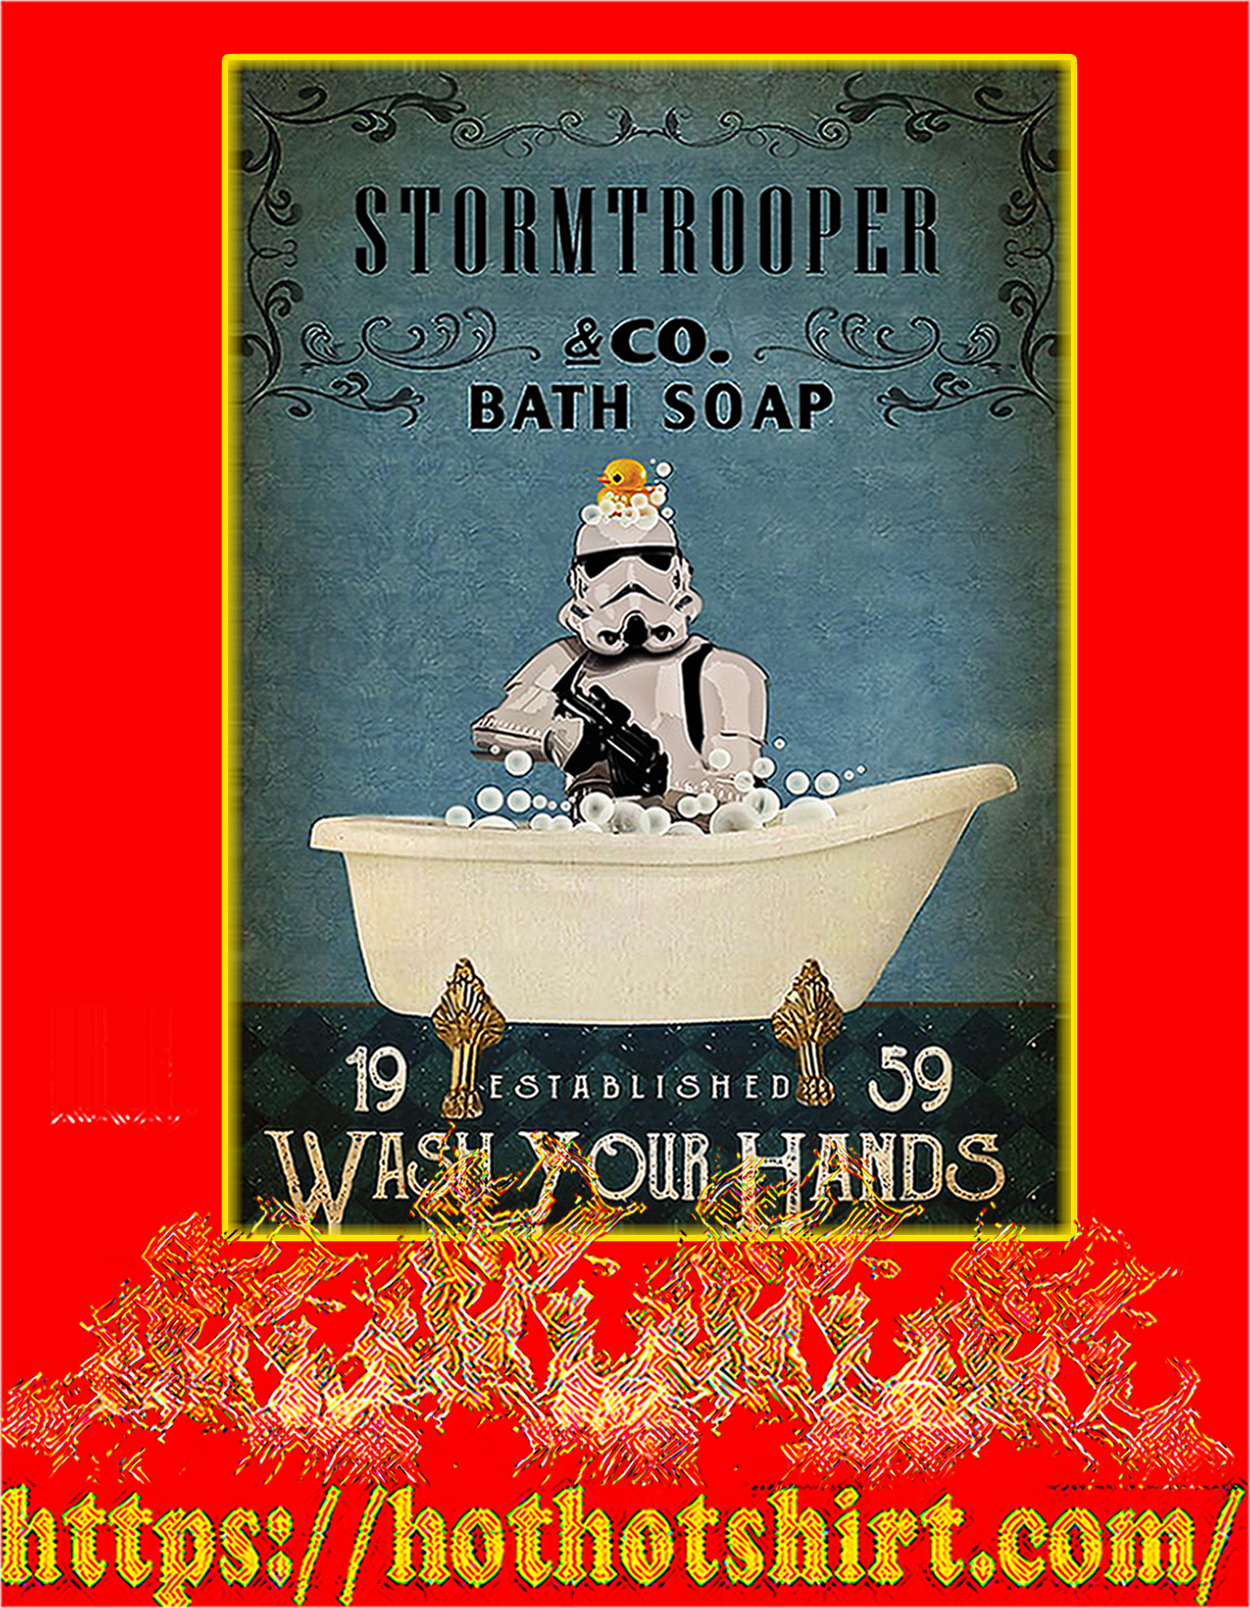 Stormtrooper co bath soap wash your hands poster